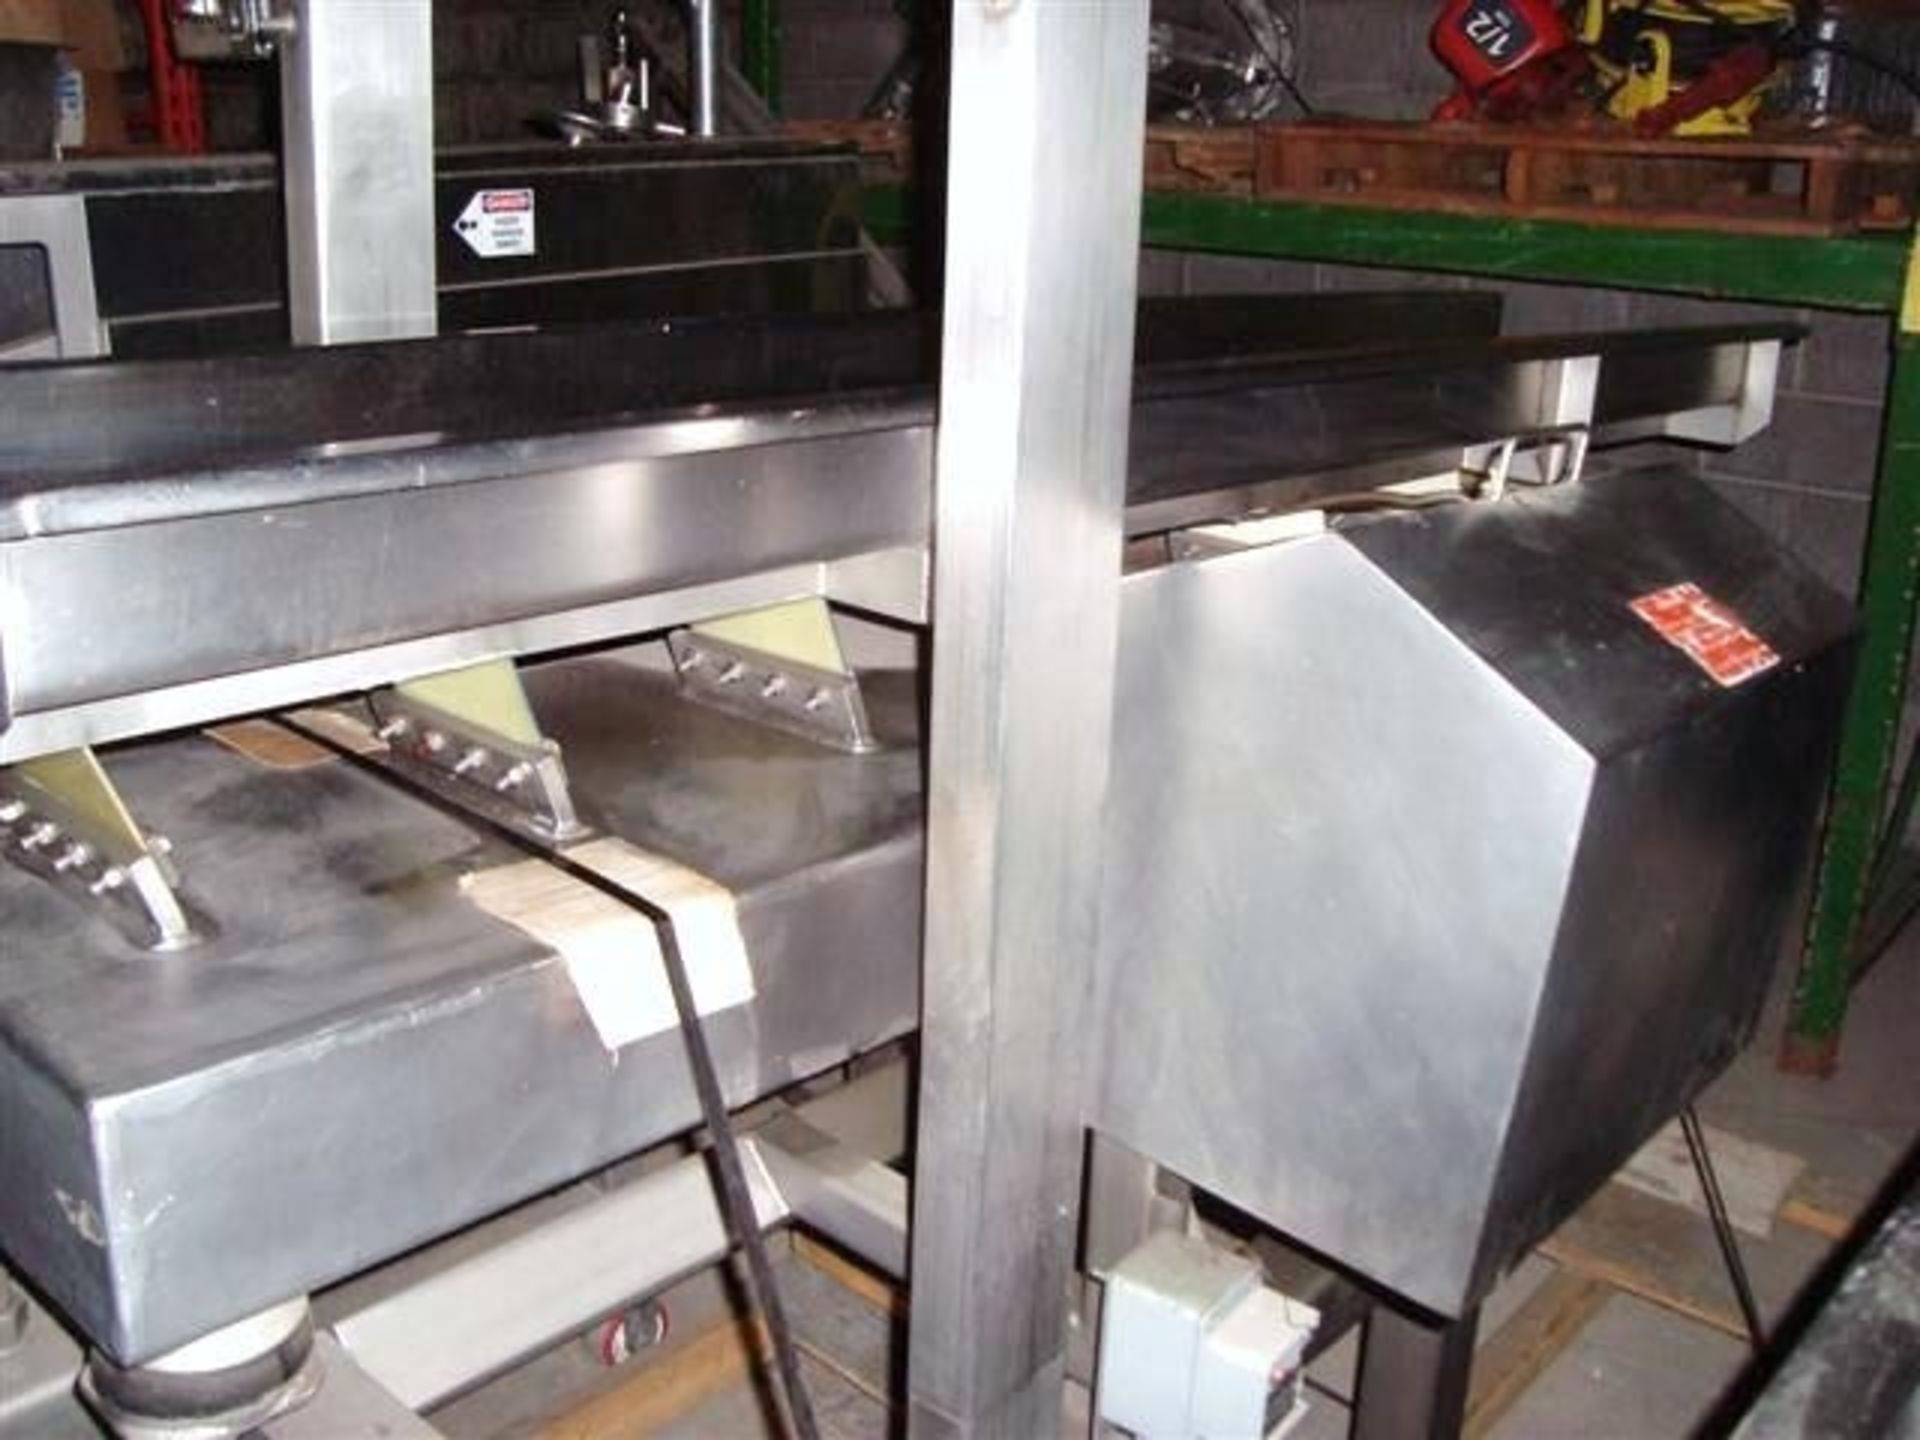 Smalley Vibratory S/S Feeder Conveyor, Model 1-V-015-007-SS-USDA, S/N 9108, Aprox.- 15" W x 84" L - Image 3 of 6